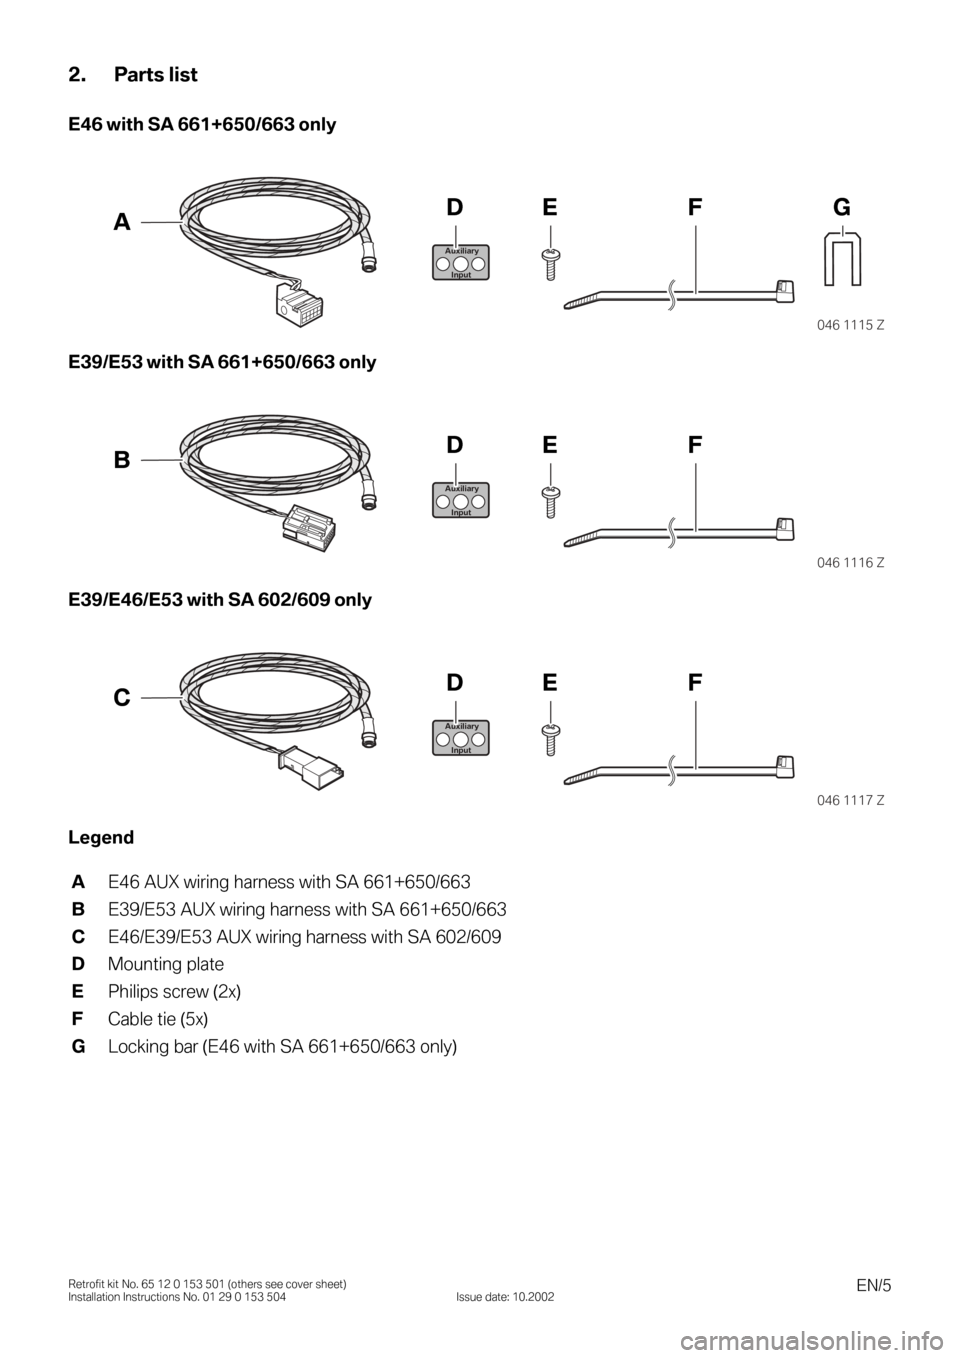 BMW 3 SERIES 2003 E46 Auxilliary Connector Installation Instruction Manual EN/5Retrofit kit No. 65 12 0 153 501 (others see cover sheet)
Installation Instructions No. 01 29 0 153 504 Issue date: 10.2002
2. Parts list
E46 with SA 661+650/663 only
0
E39/E53 with SA 661+650/663